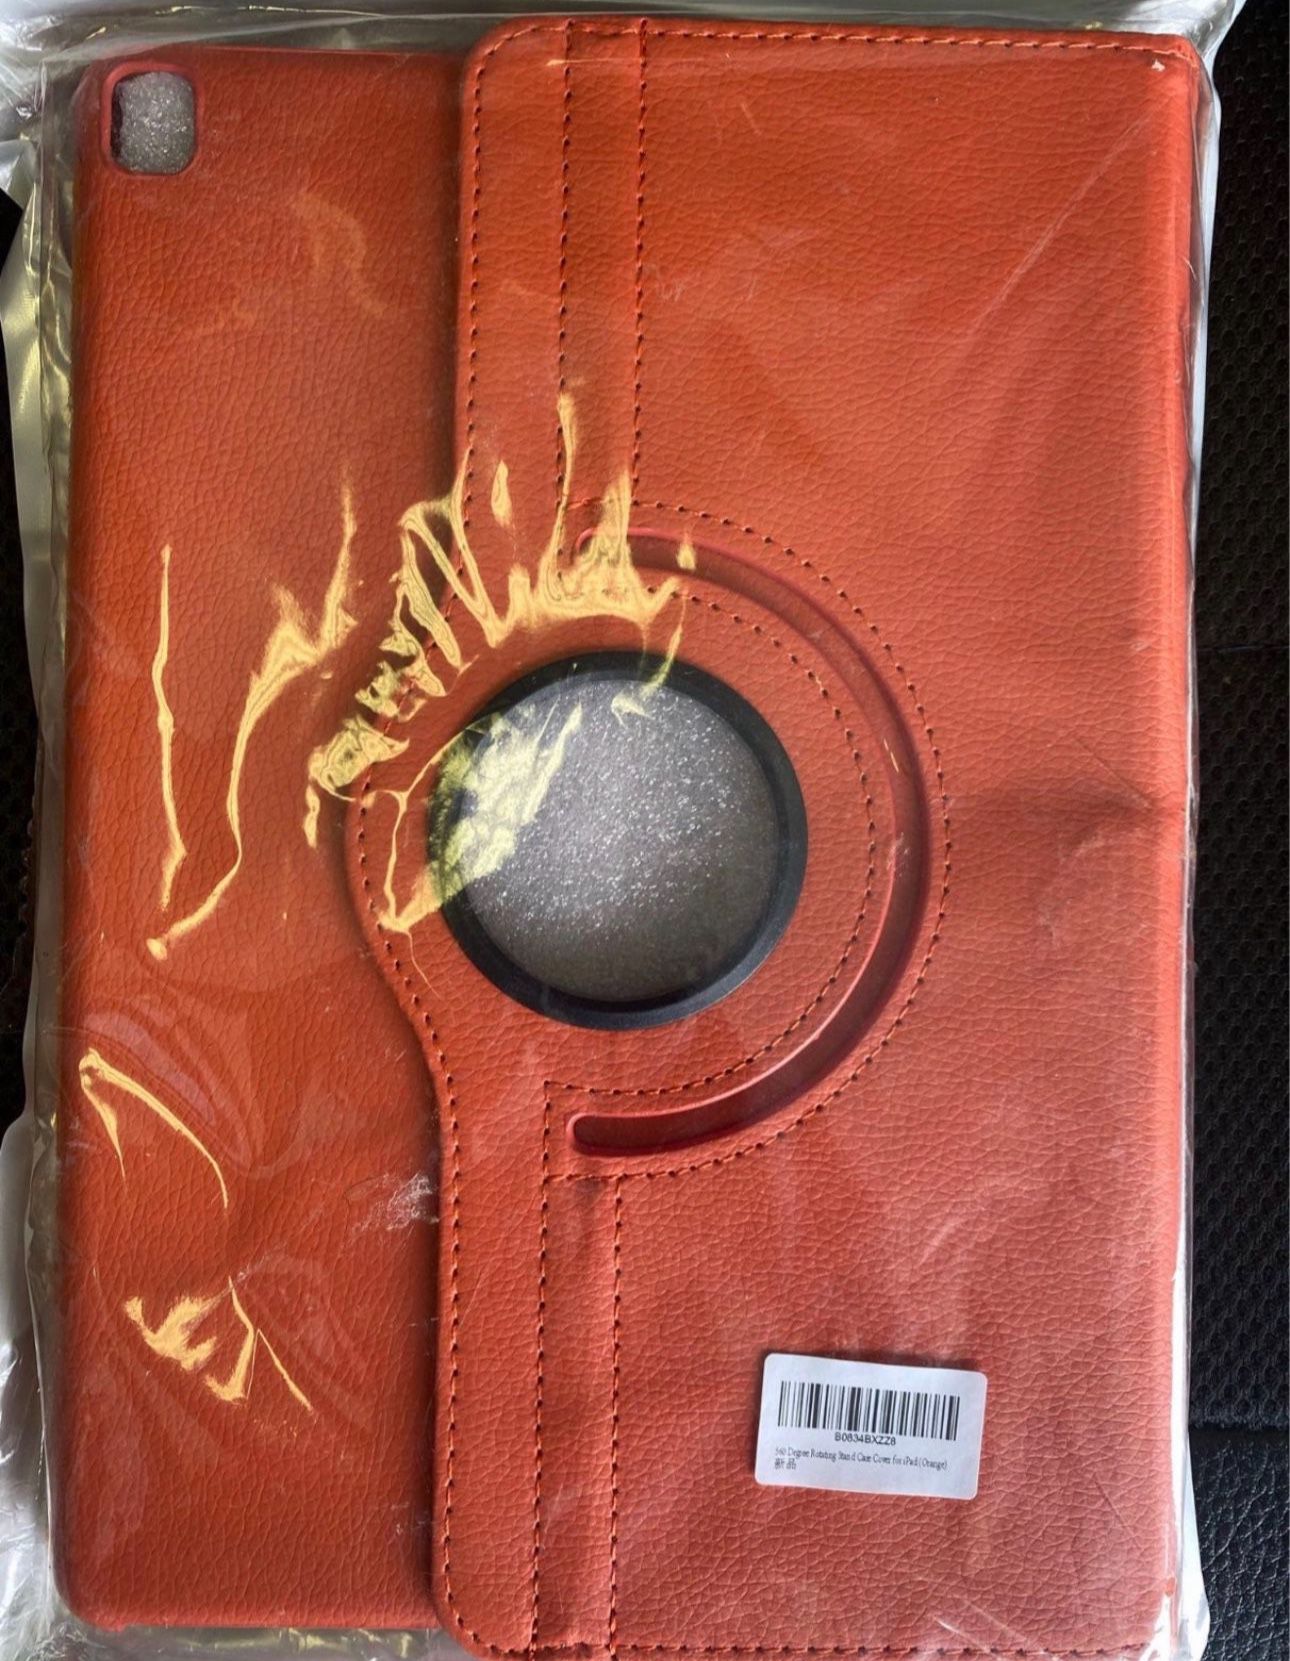 360 Degree ratating stand case cover for ipad orange color. Brand new never used